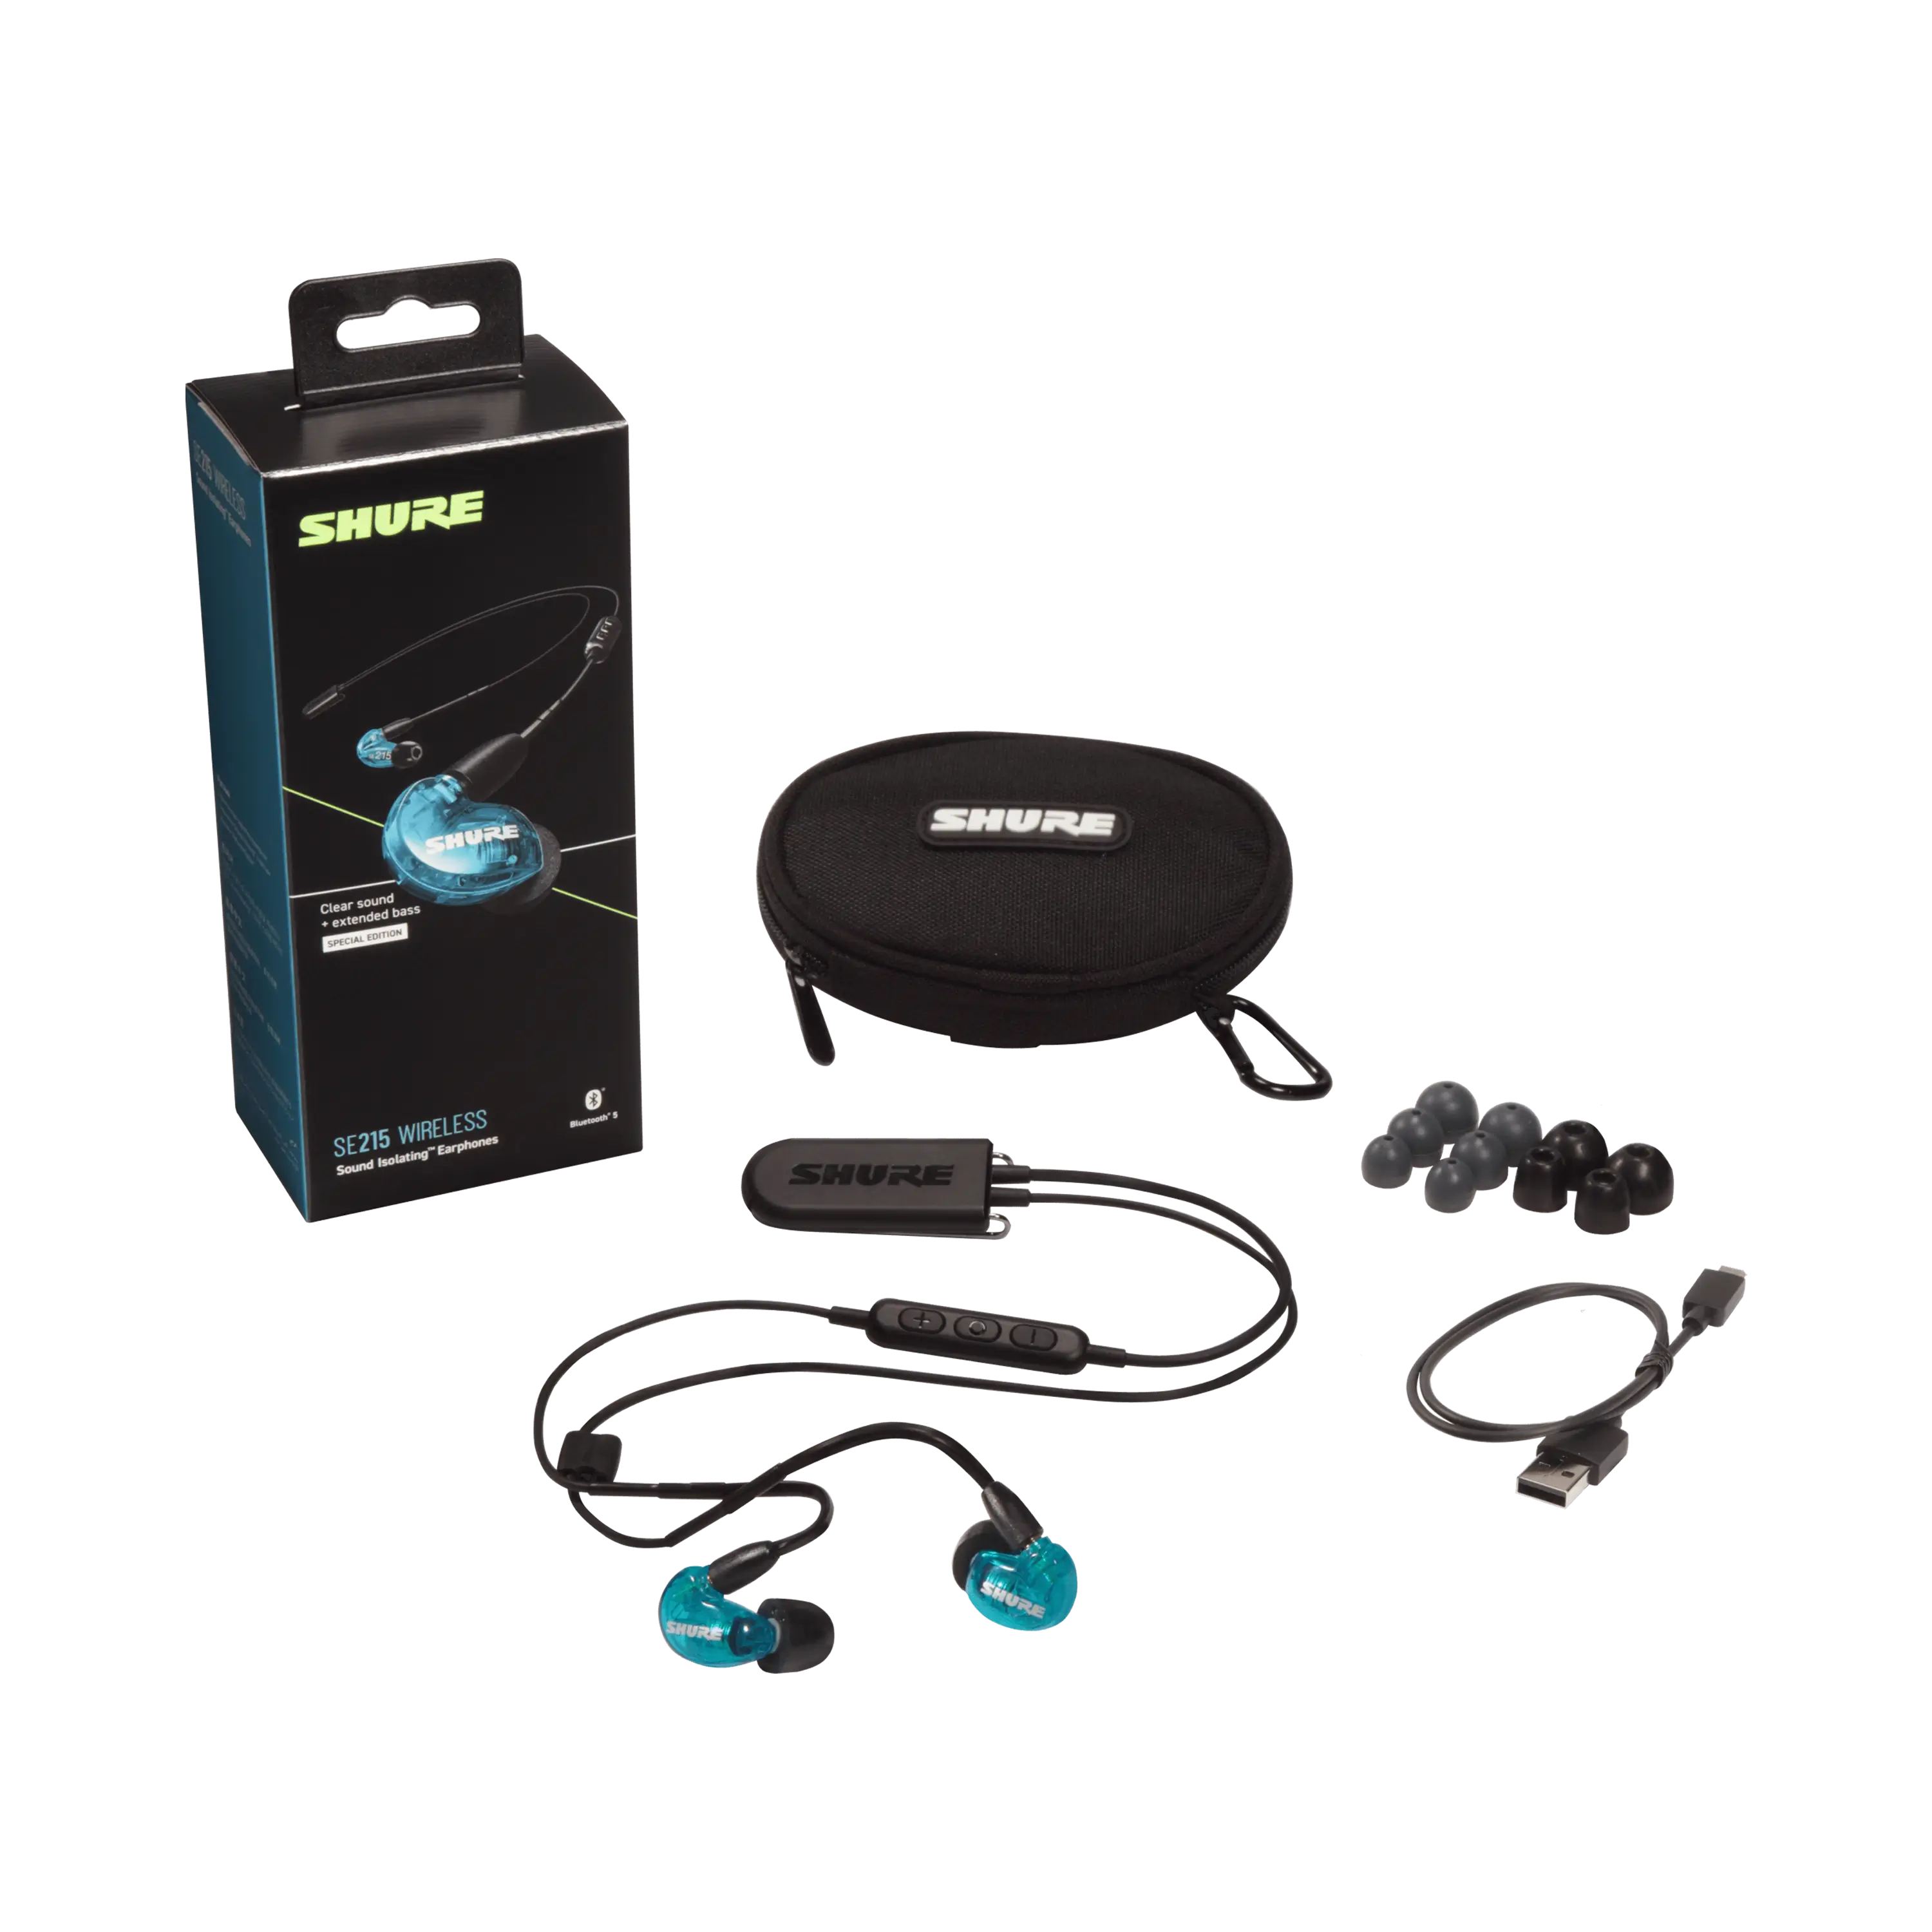 Shure SE215 Sound-isolating Earphones - Limited Edition Green